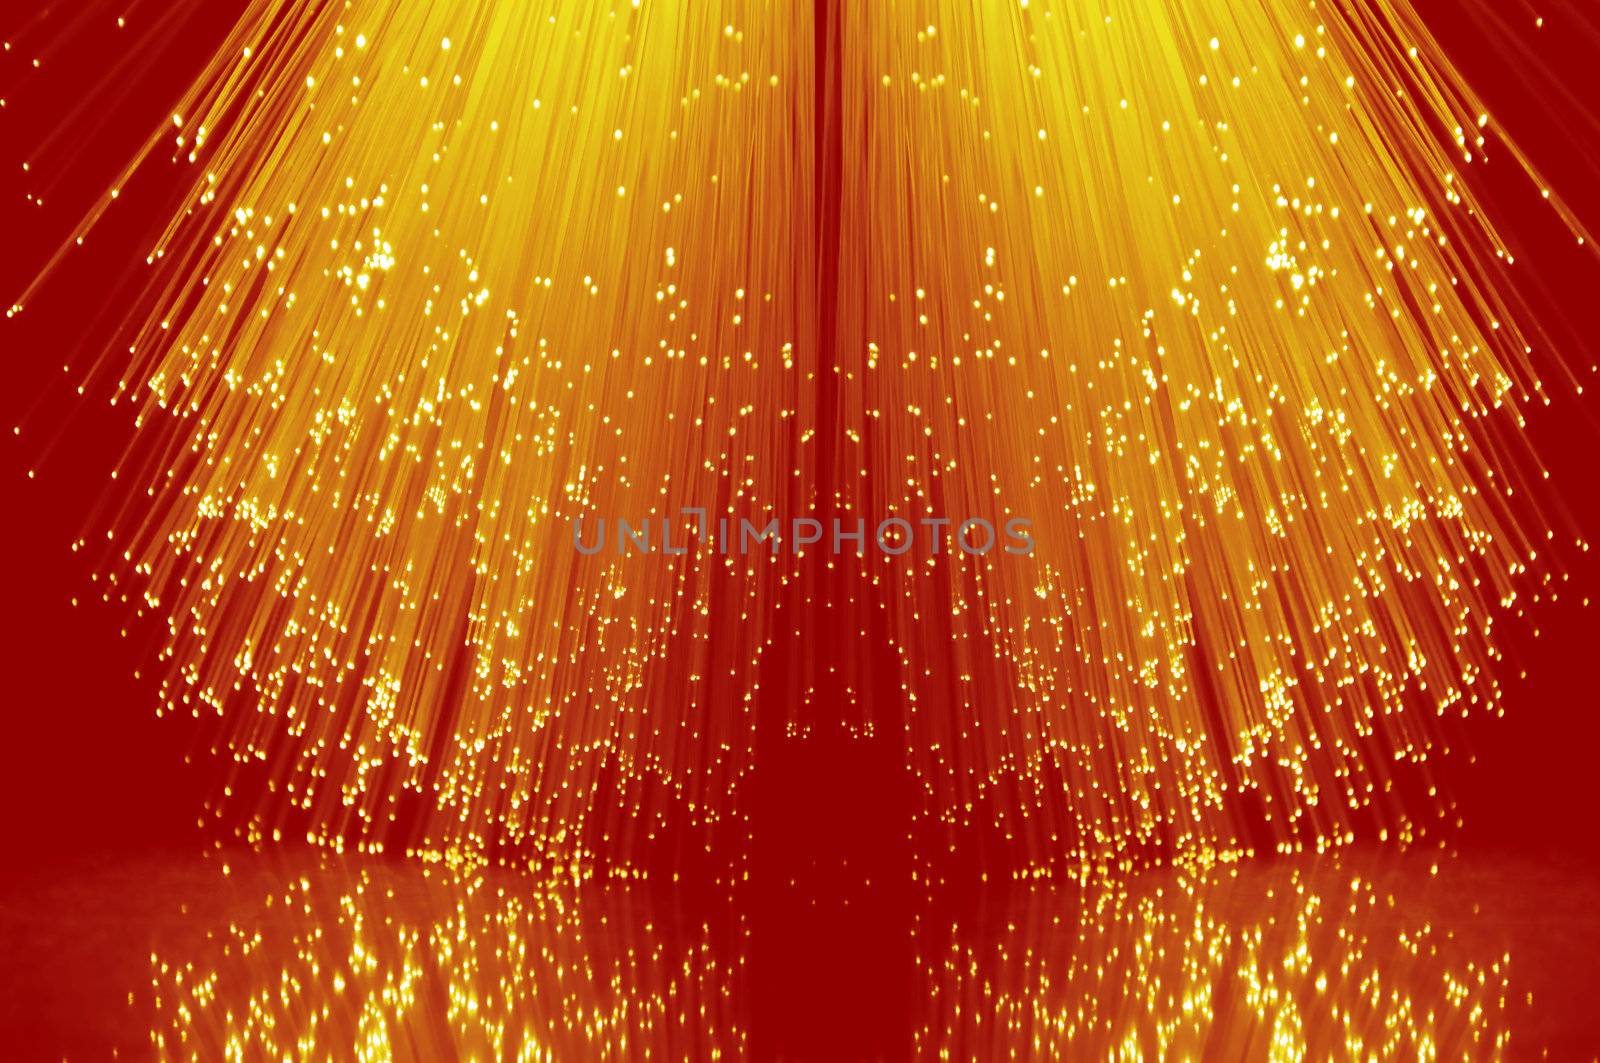 Low level angle capturing the ends of many illuminated yellow fibre optic light strands against a red background in reflecting into the foreground.